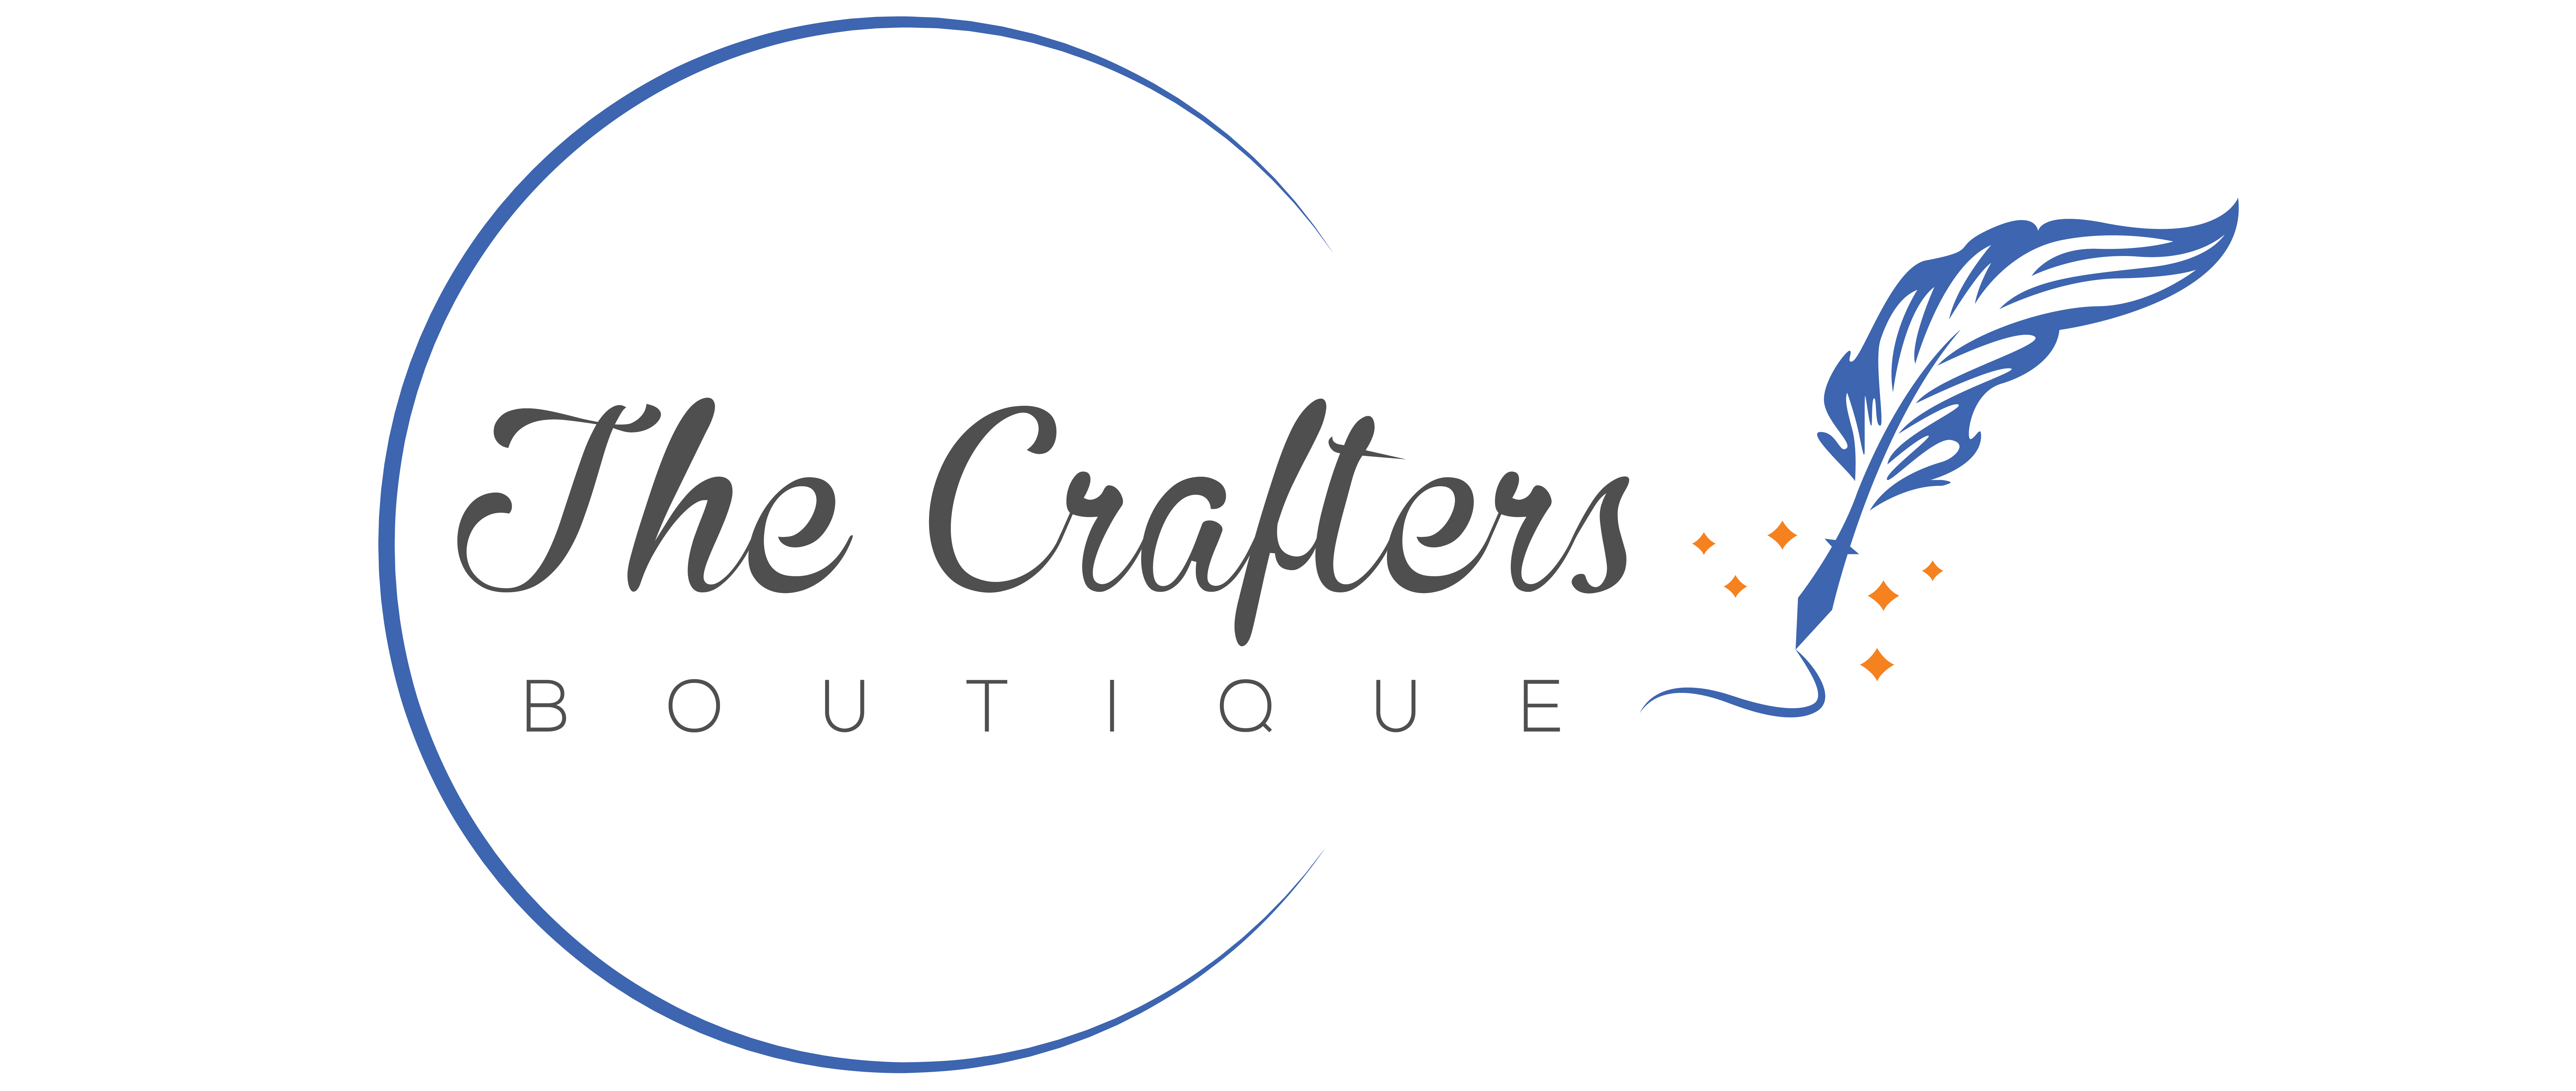 The Crafters Boutique